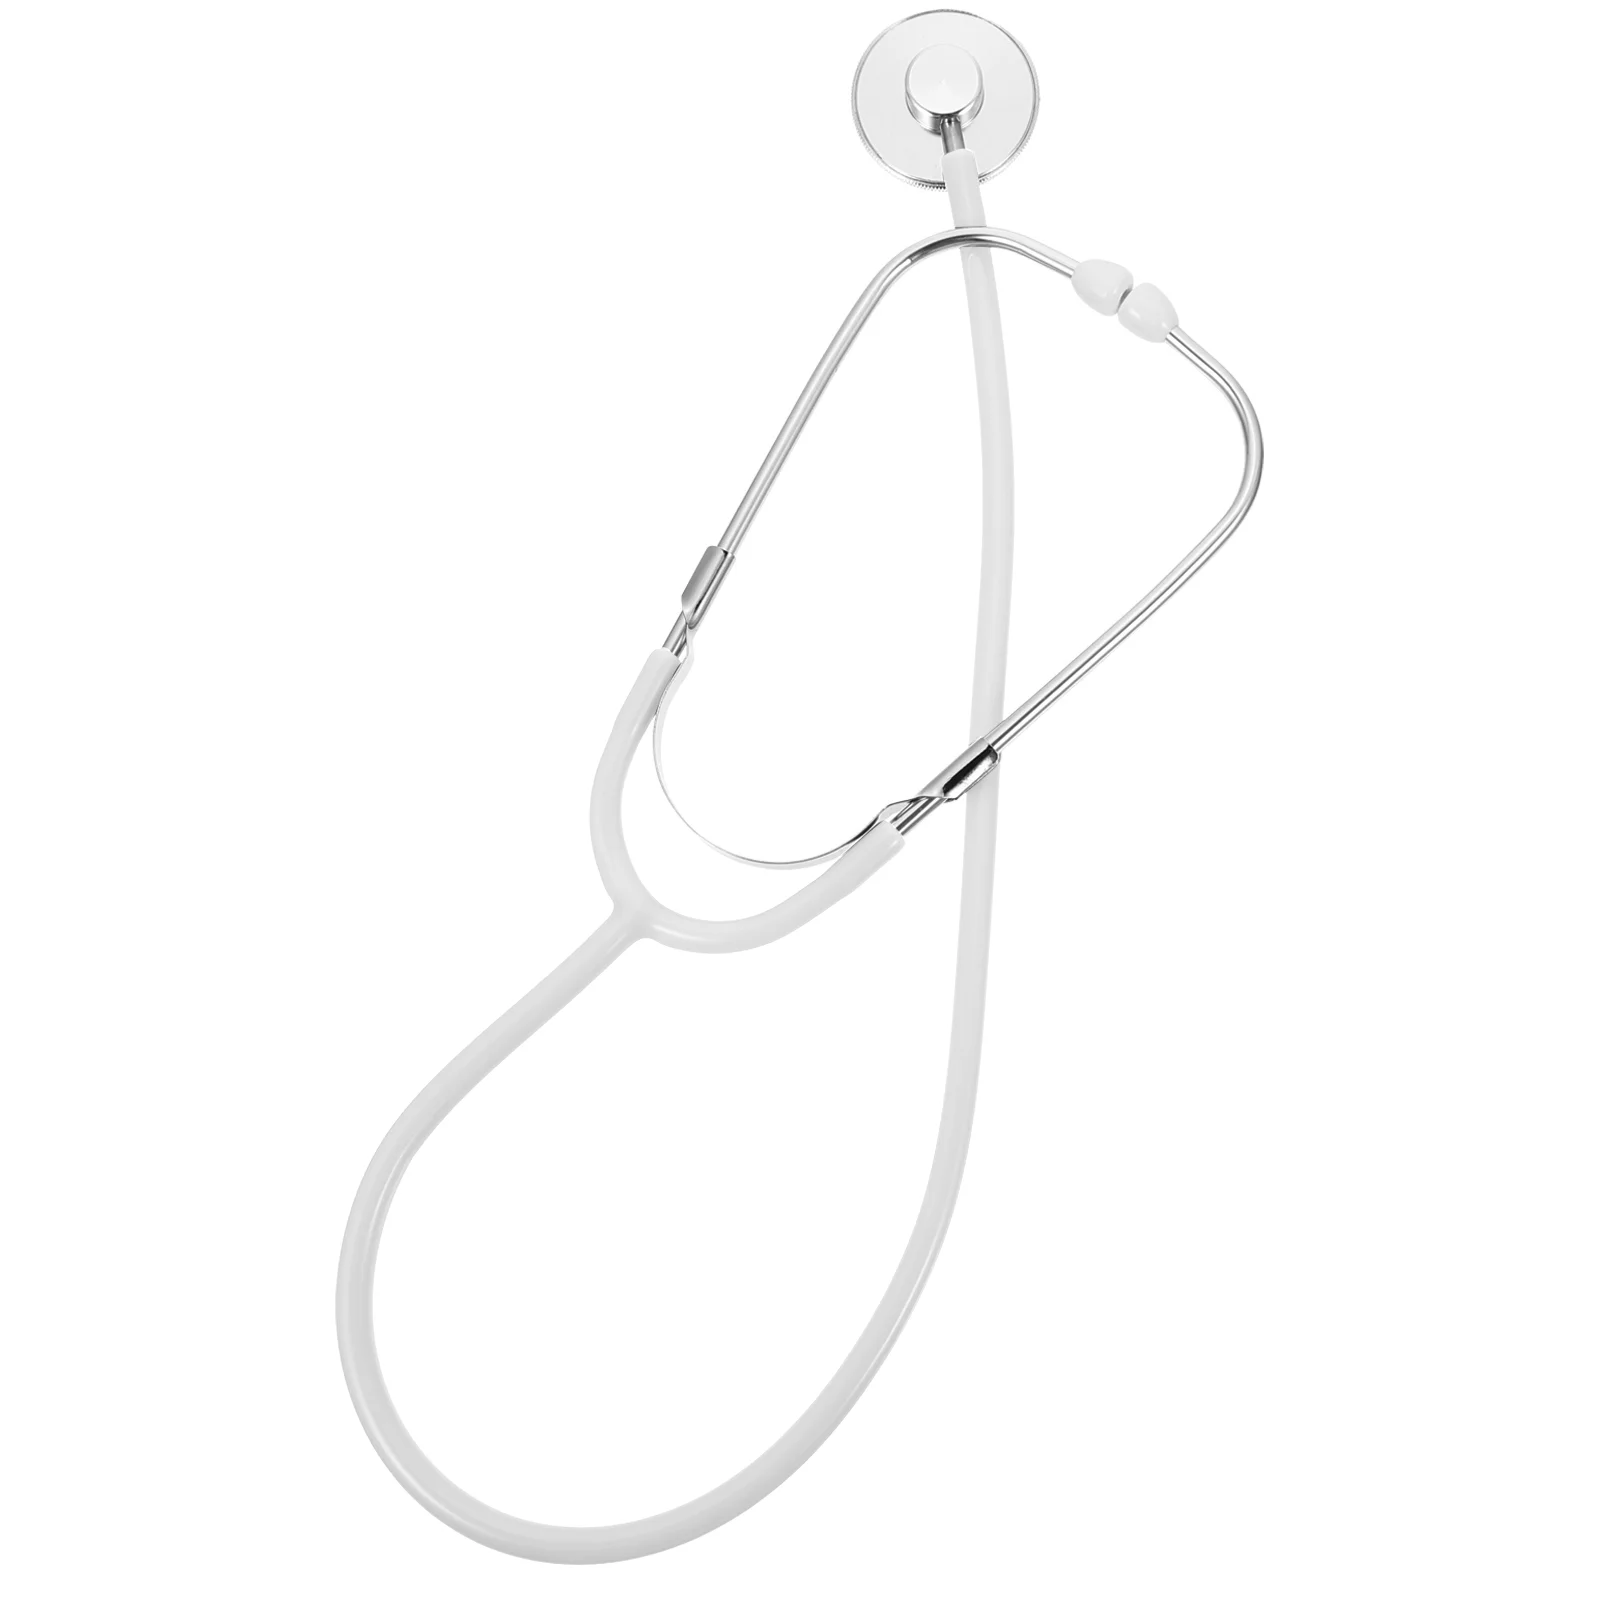 

Holiday Party Nurse Stethoscope Props Toy White Color Simulation Metal Simulated Doctor